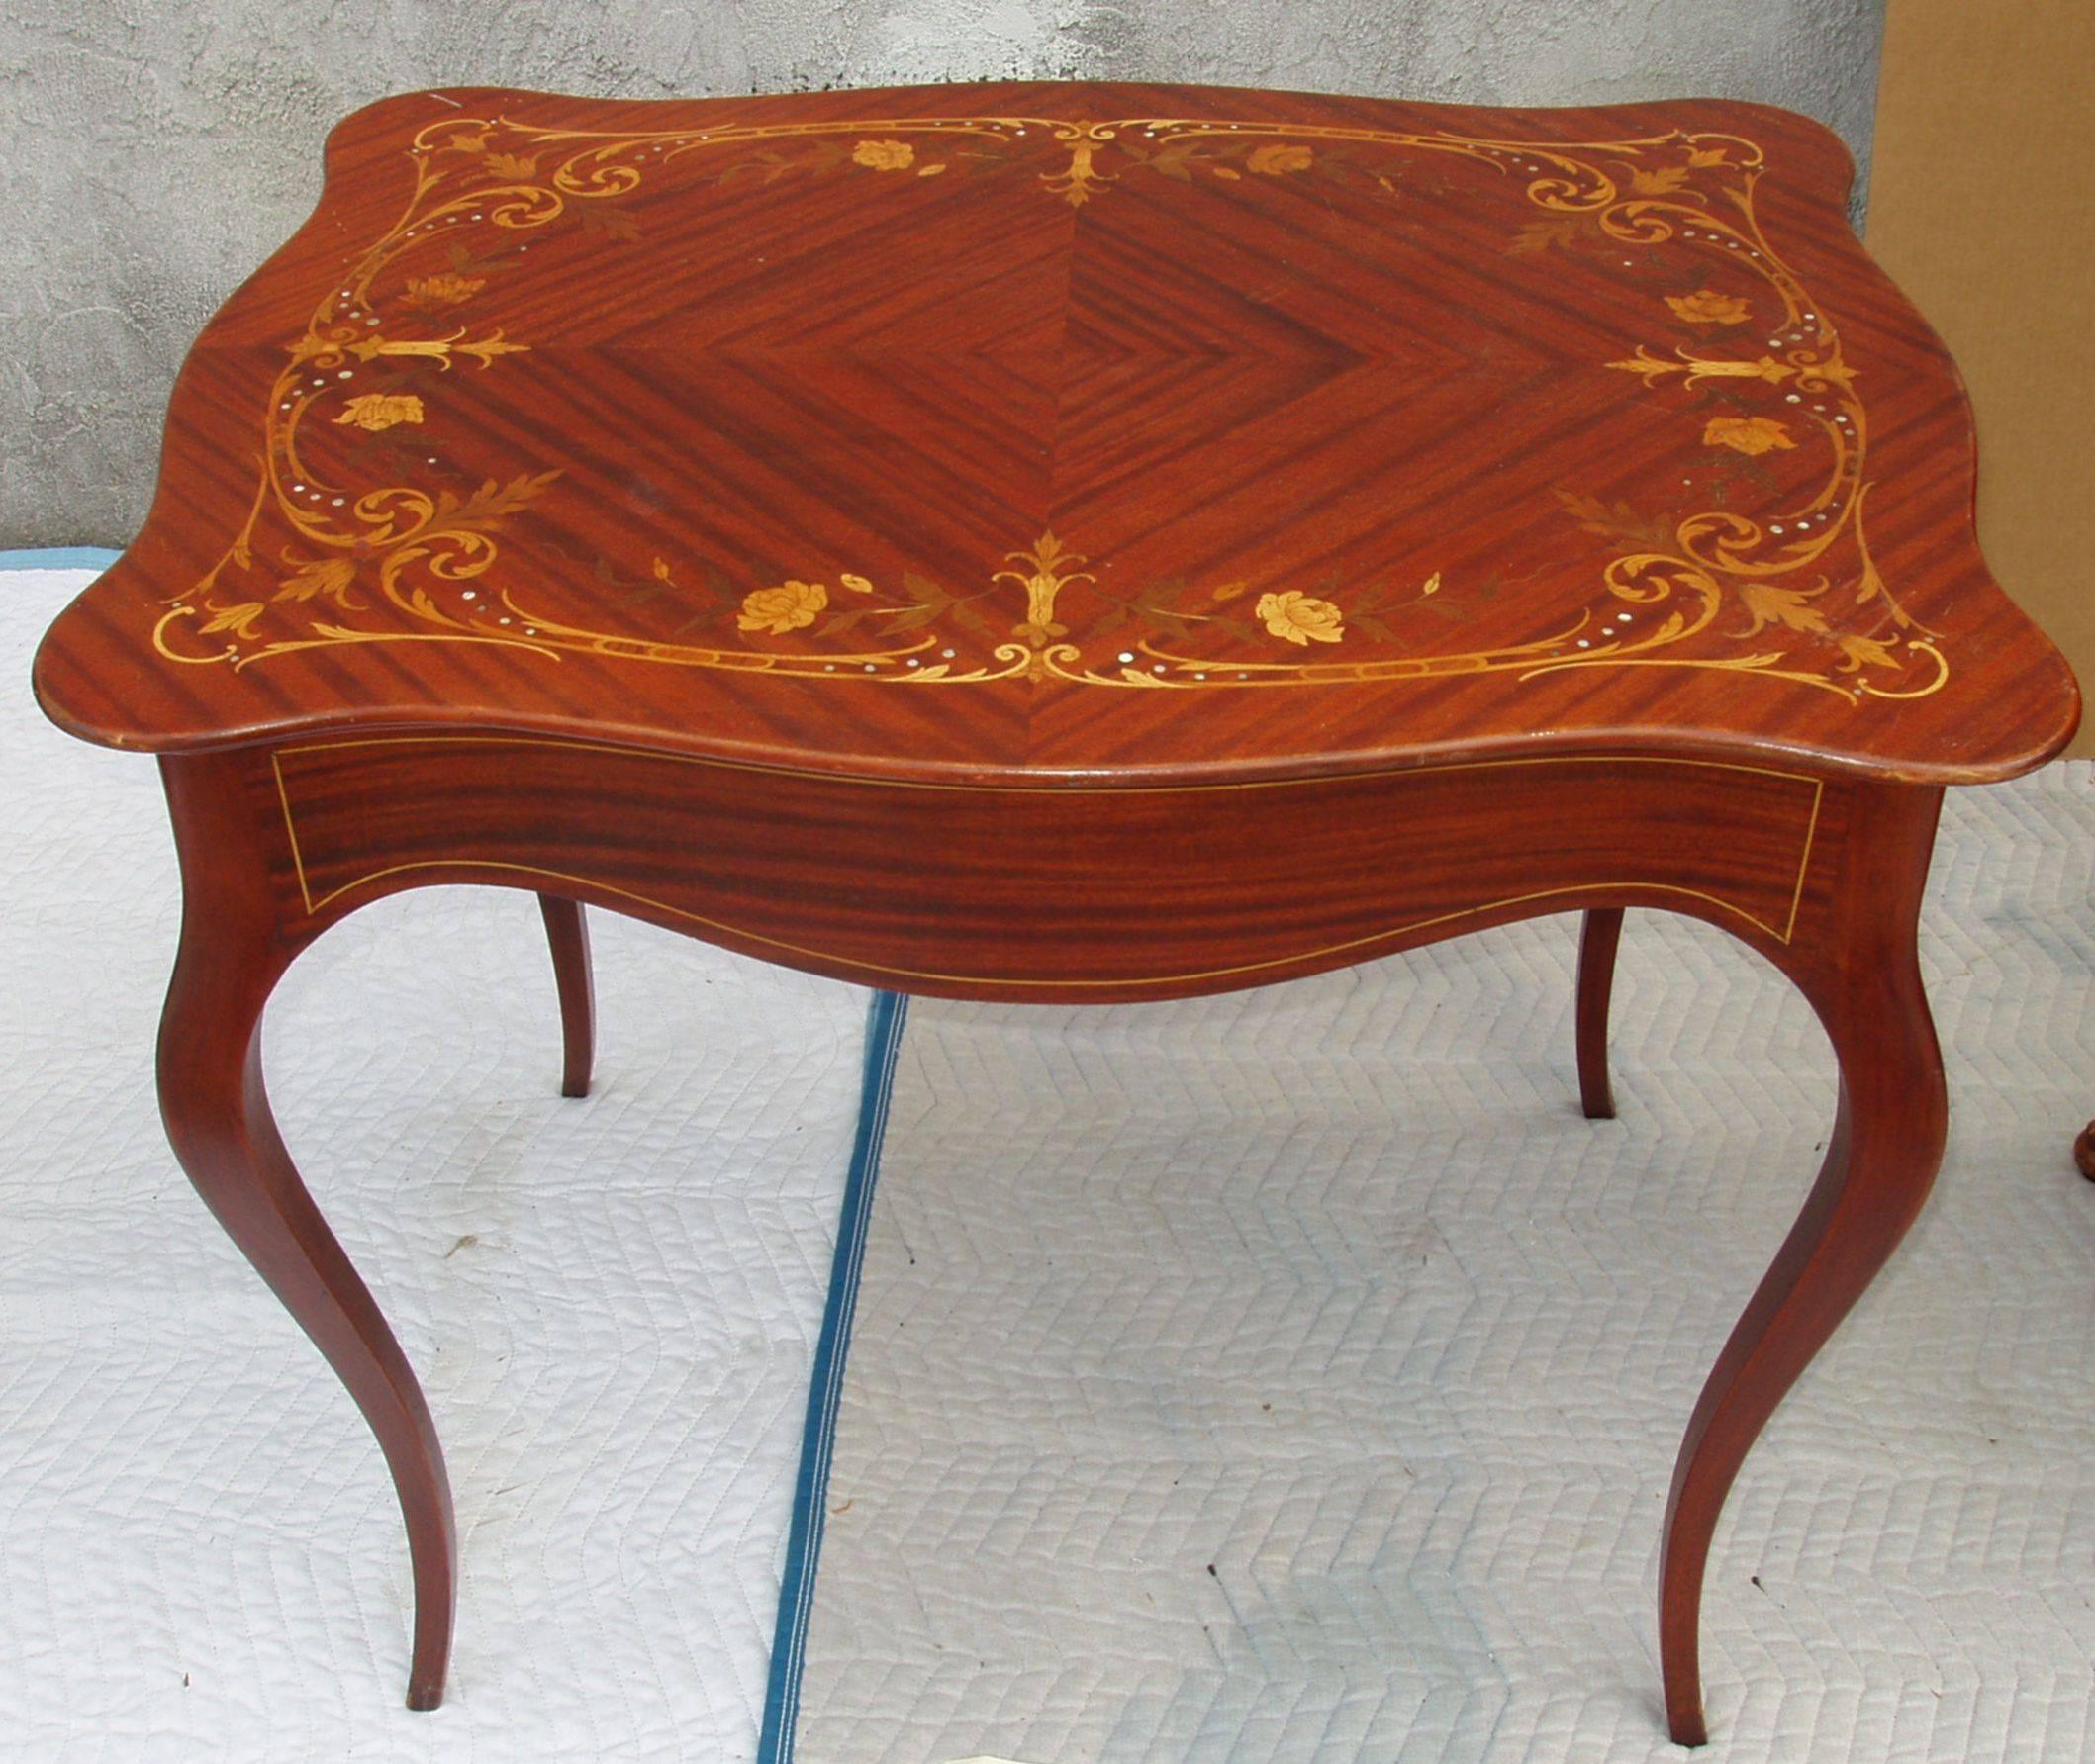 A beautiful Art Nouveau side table or ladies desk in the majorelle style with lovely exotic wood floral marquetry and mother-of-pearl inlay top, inlay trim around apron. Circa 1920